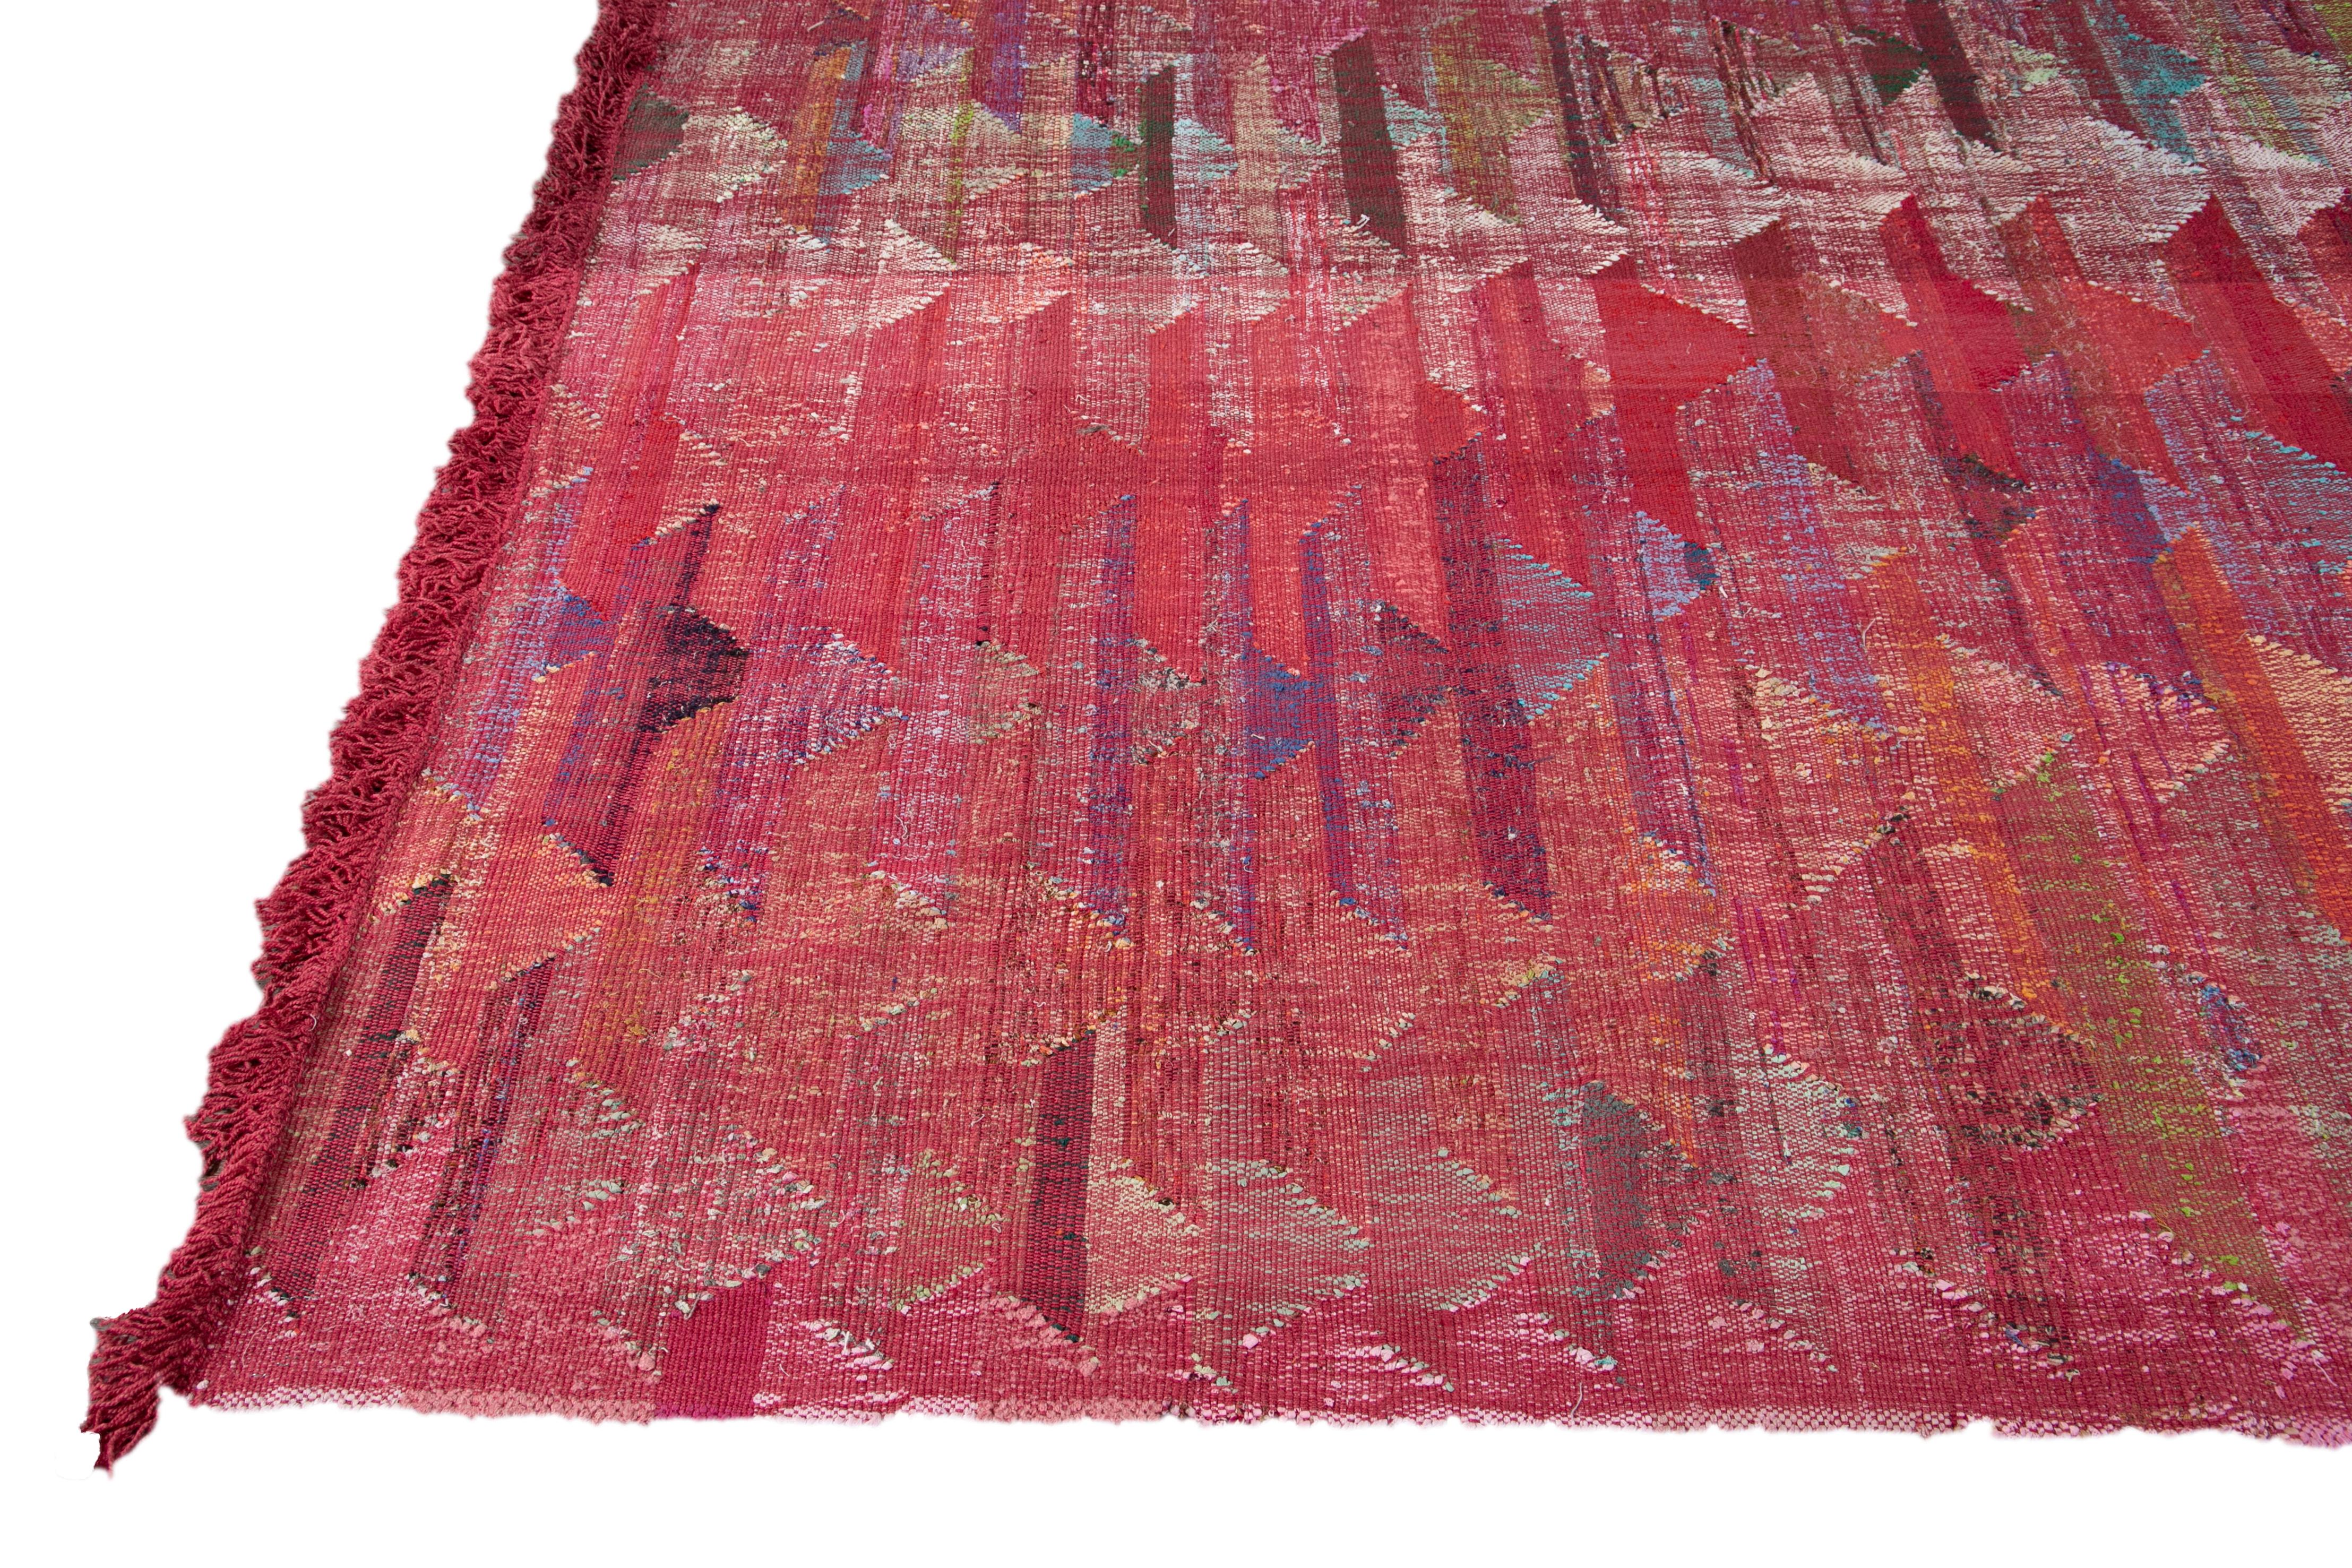 Beautiful Modern Kilim Flat-weave handmade wool rug. This piece of art has a red field and multi-color accents in a gorgeous geometric abstract design.

This rug measures: 10'1